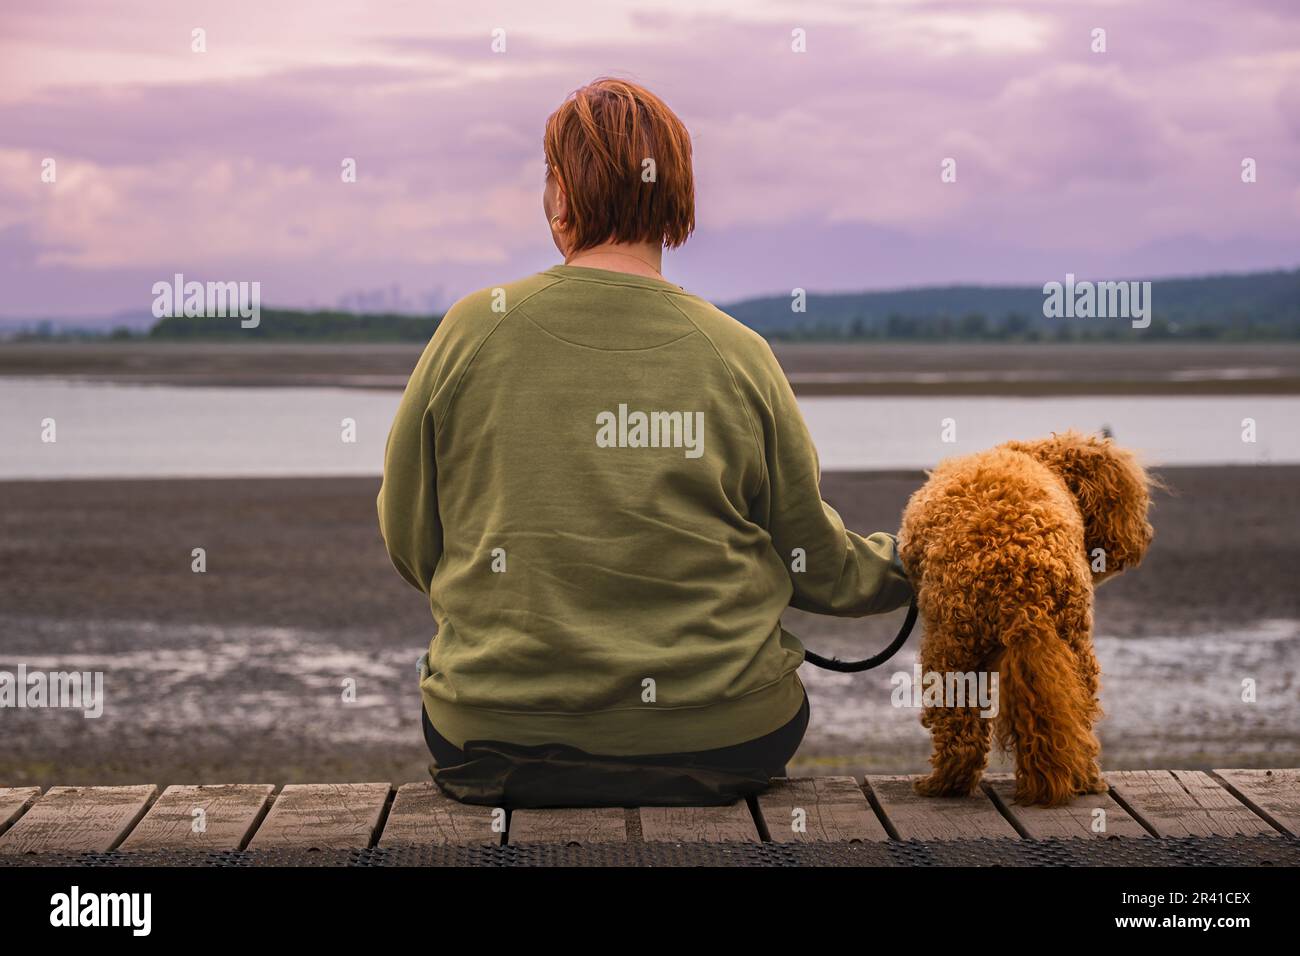 View from behind of a woman and her dog sitting on the bench. Yong woman with the dog resting on a bench while walking the dog. Family, pet, animal an Stock Photo